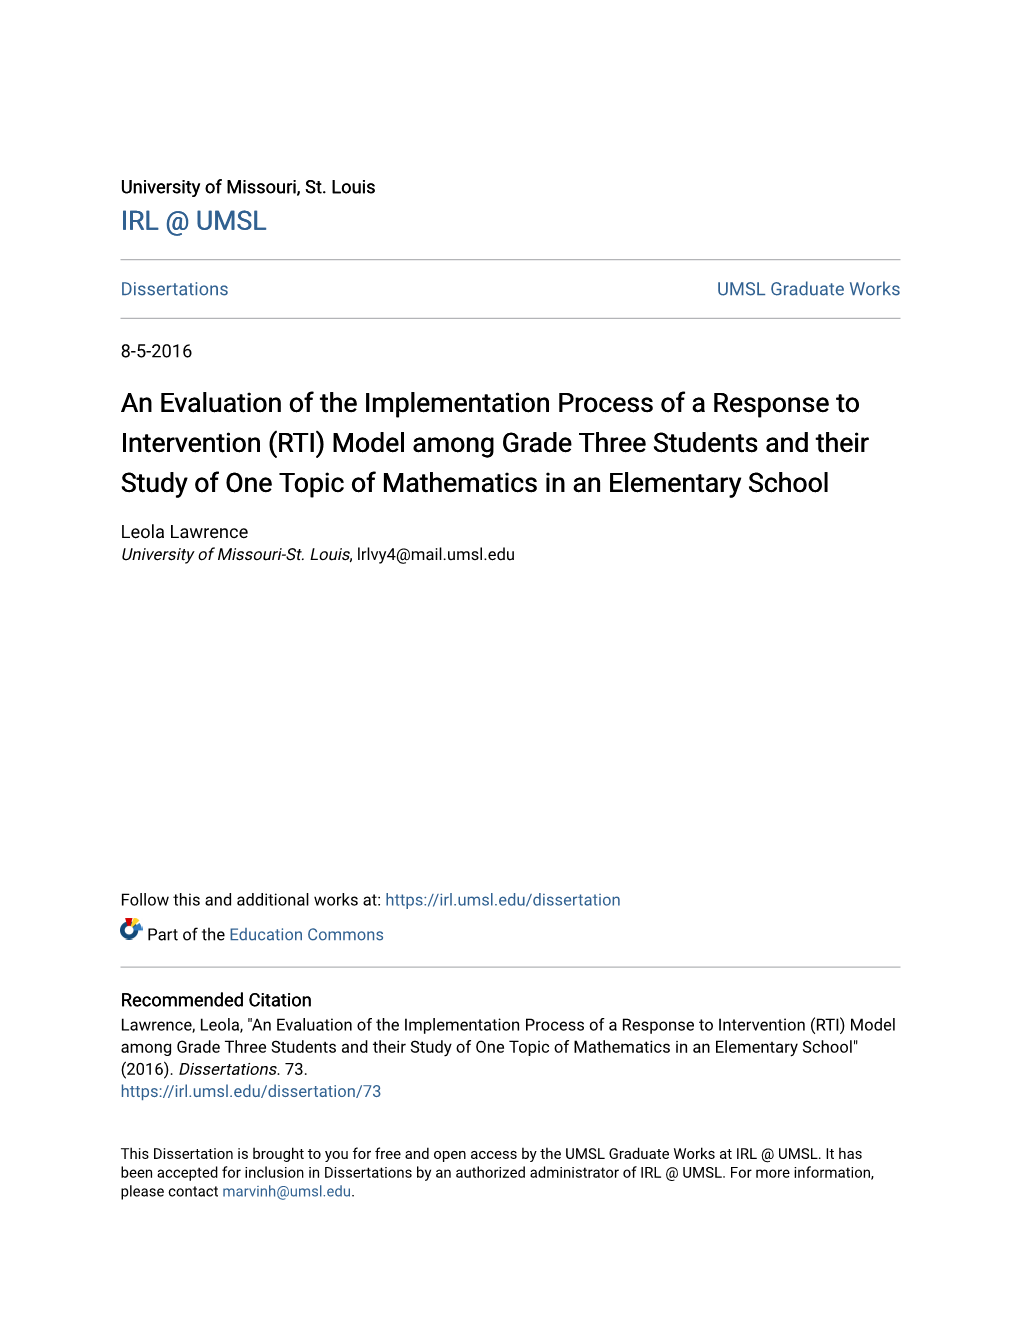 An Evaluation of the Implementation Process of a Response to Intervention (RTI) Model Among Grade Three Students and Their Study